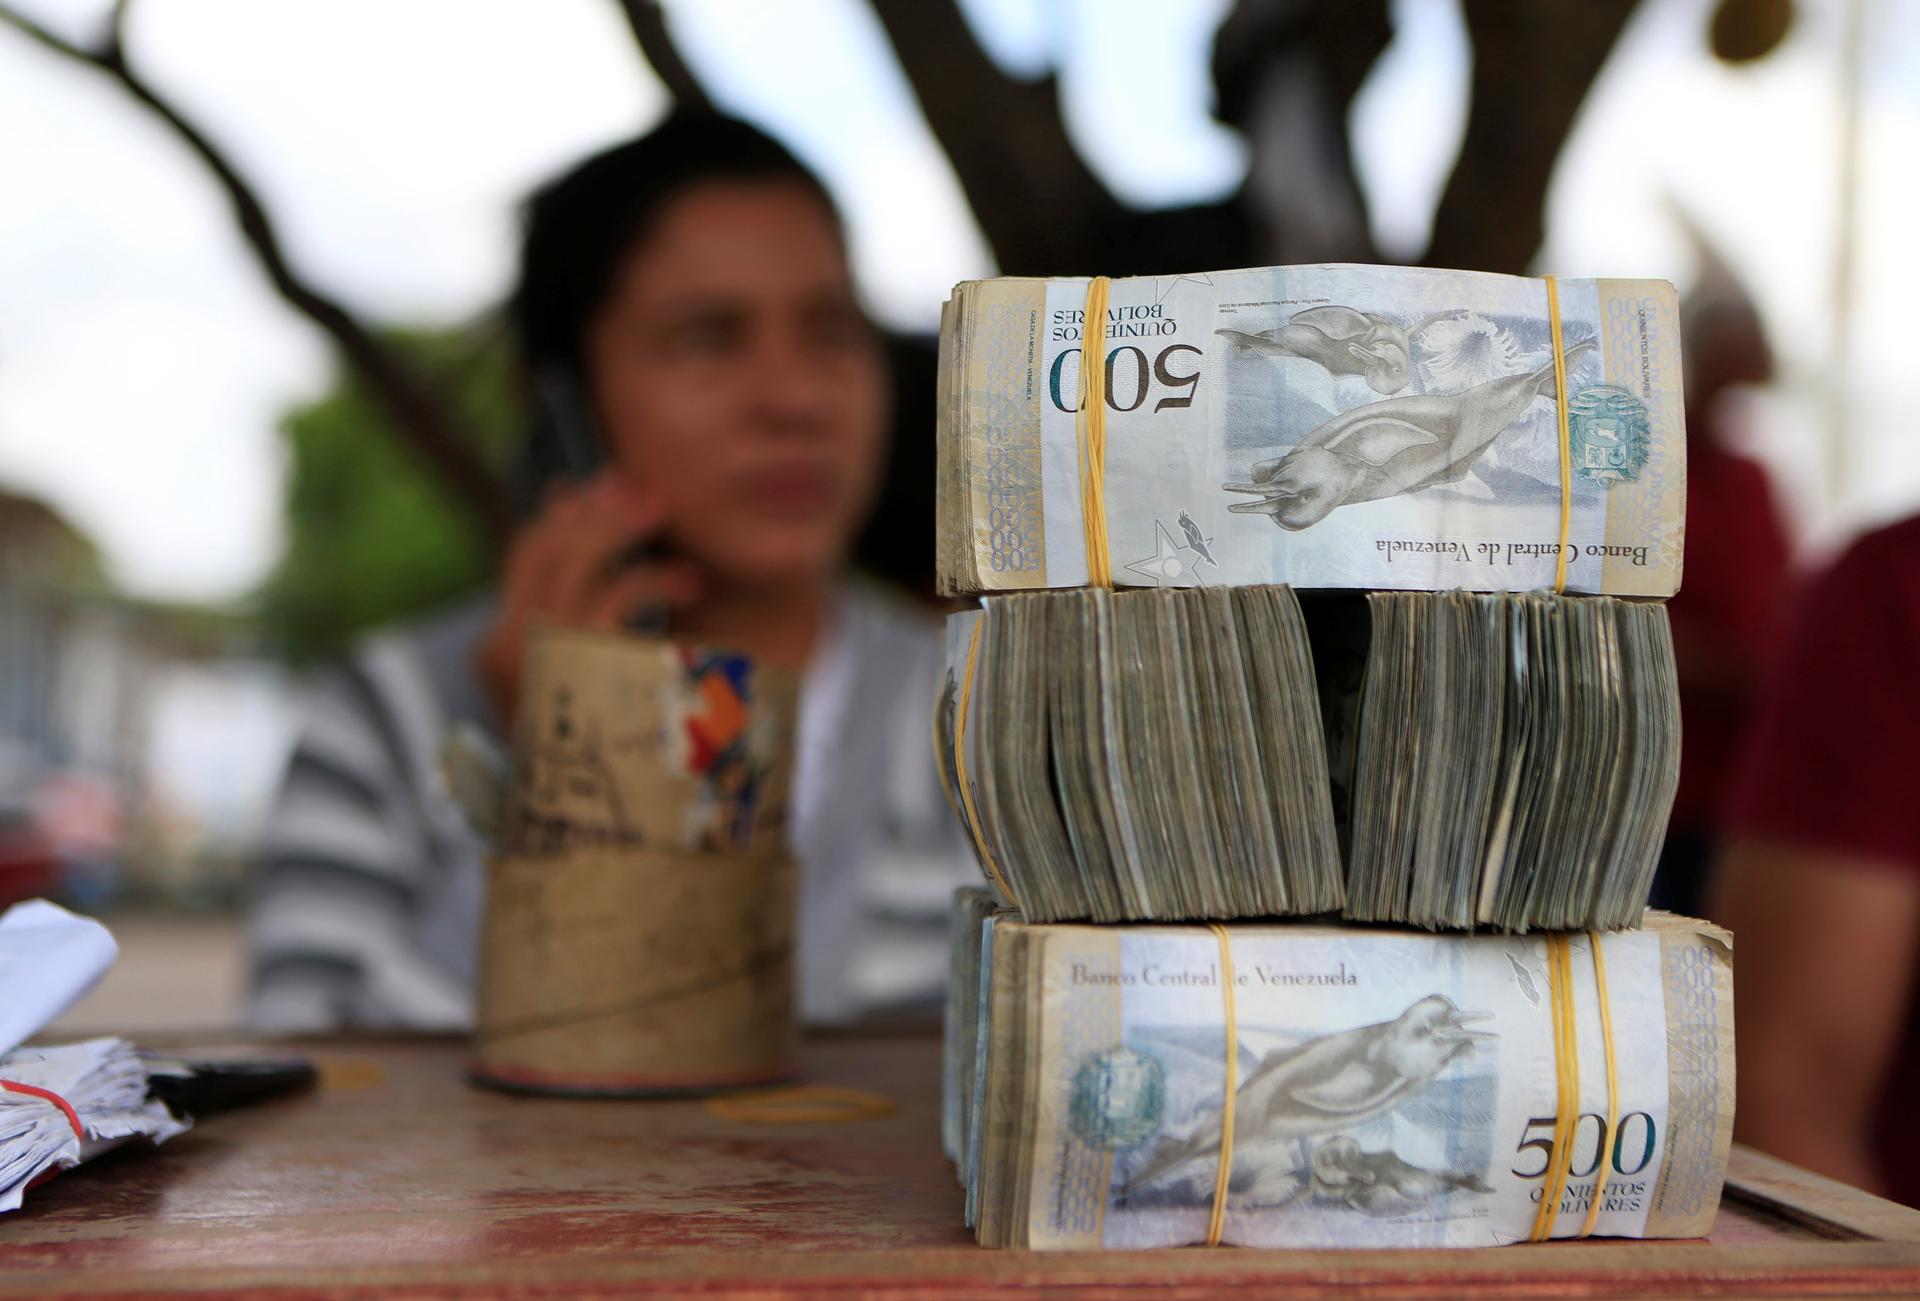 A money changer sits at a table at the border between Colombia and Venezuela, in Paraguachón, Colombia, Feb. 16, 2018.